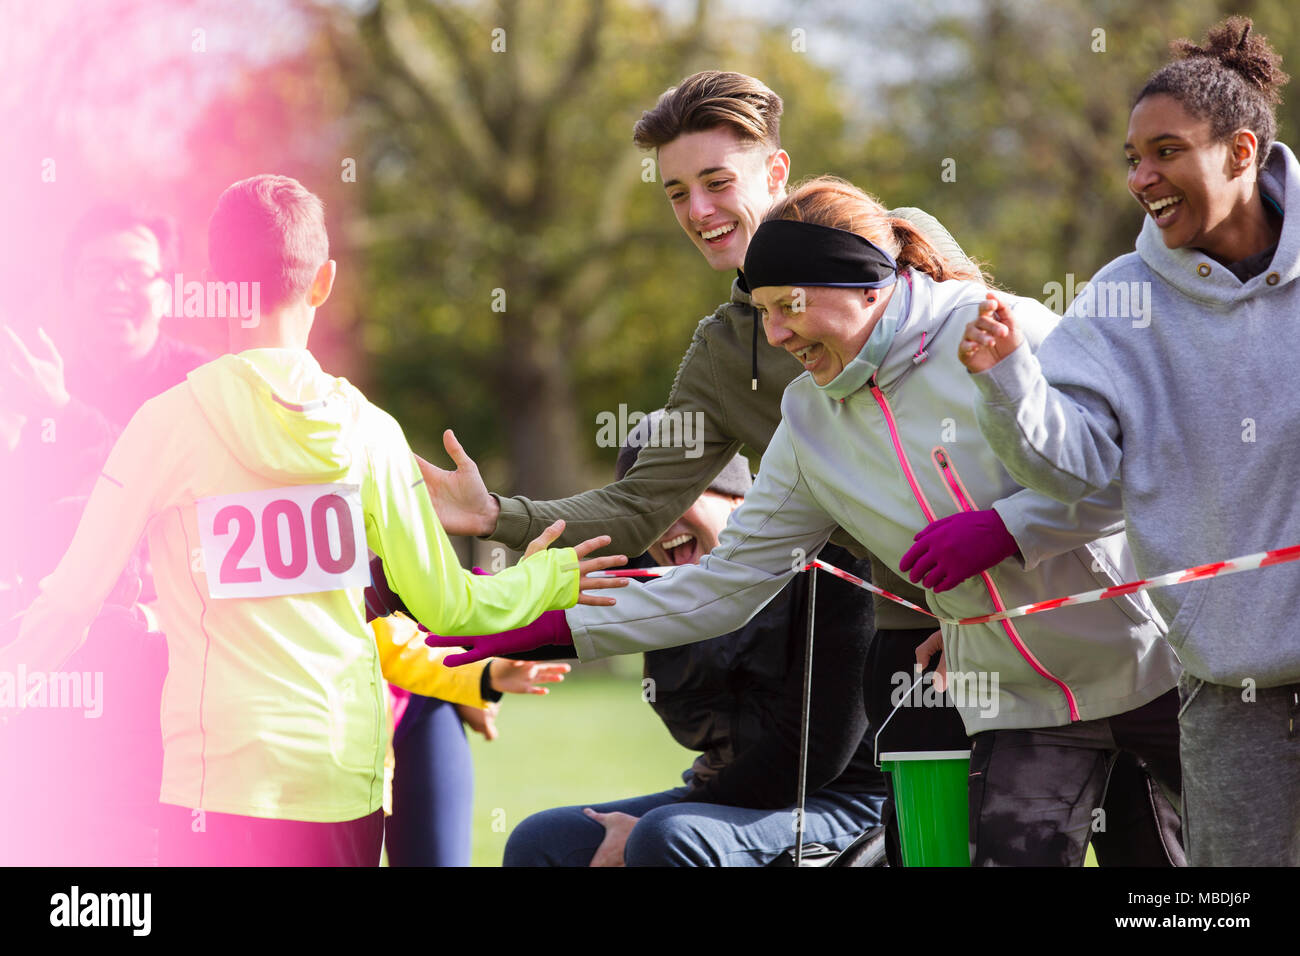 Spectators high-fiving runner at charity run in park Stock Photo